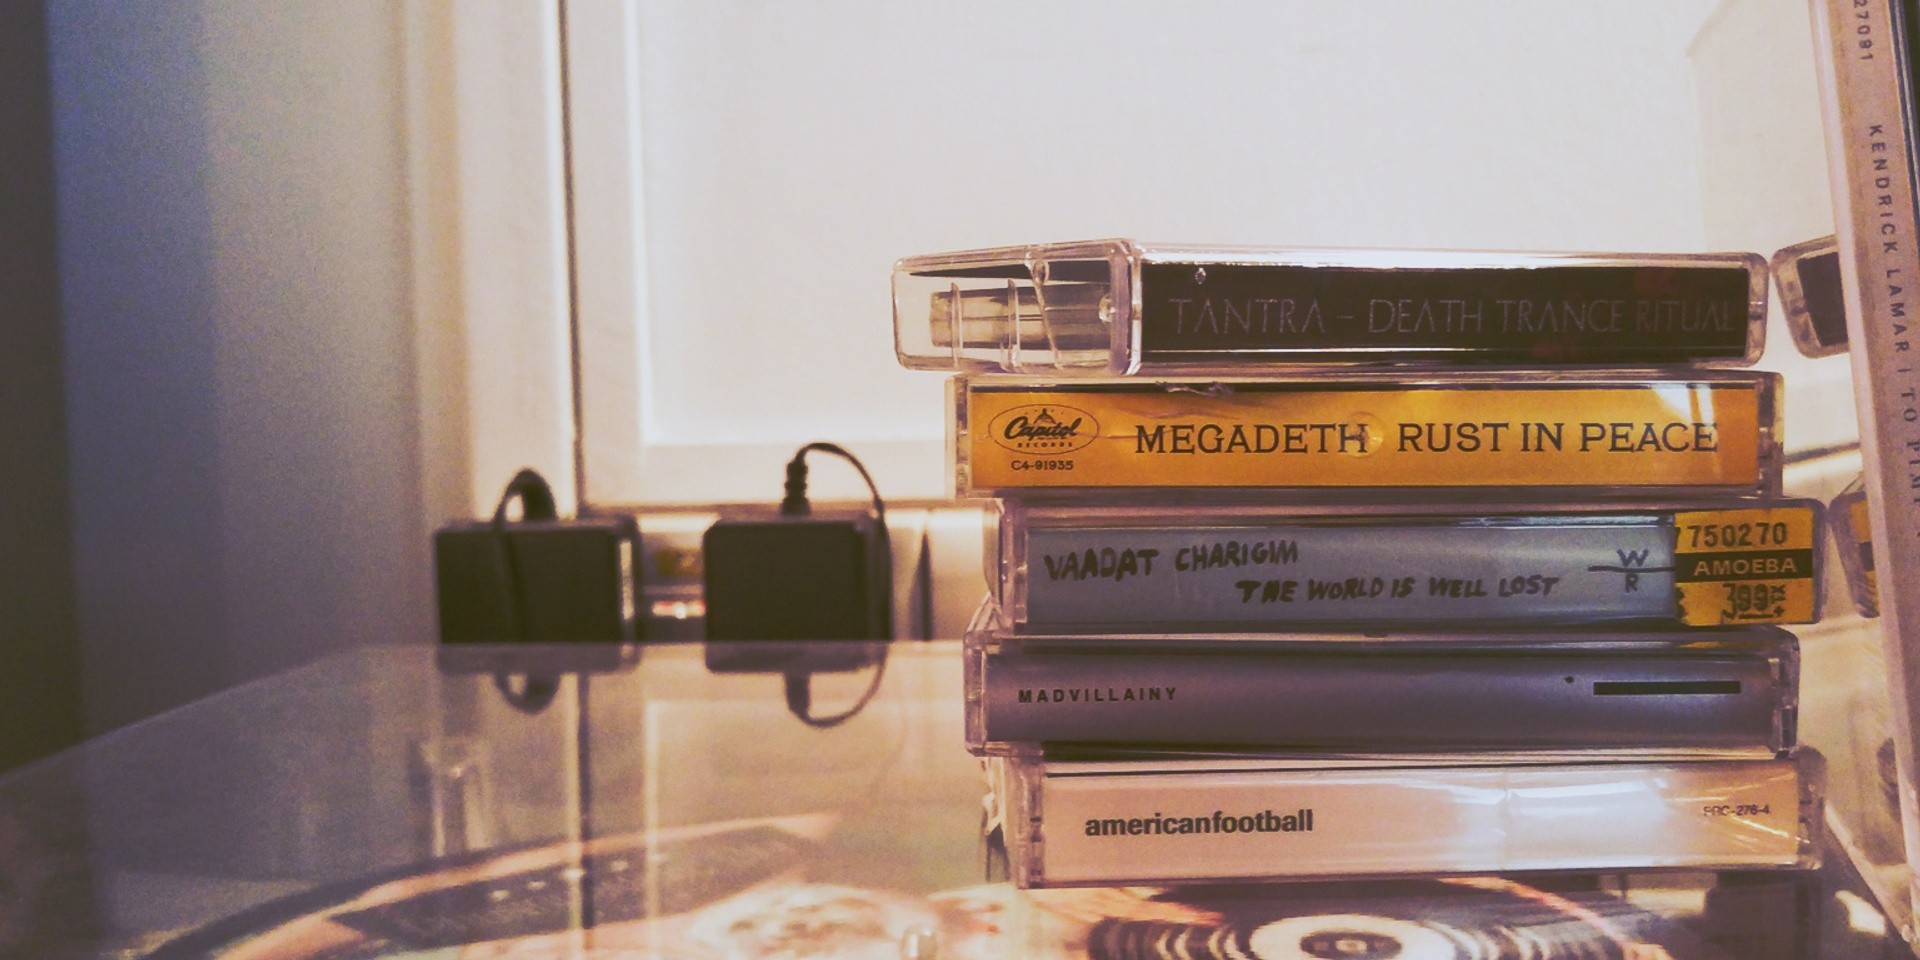 Cassettes making a comeback? Maybe not, but it's still very cool